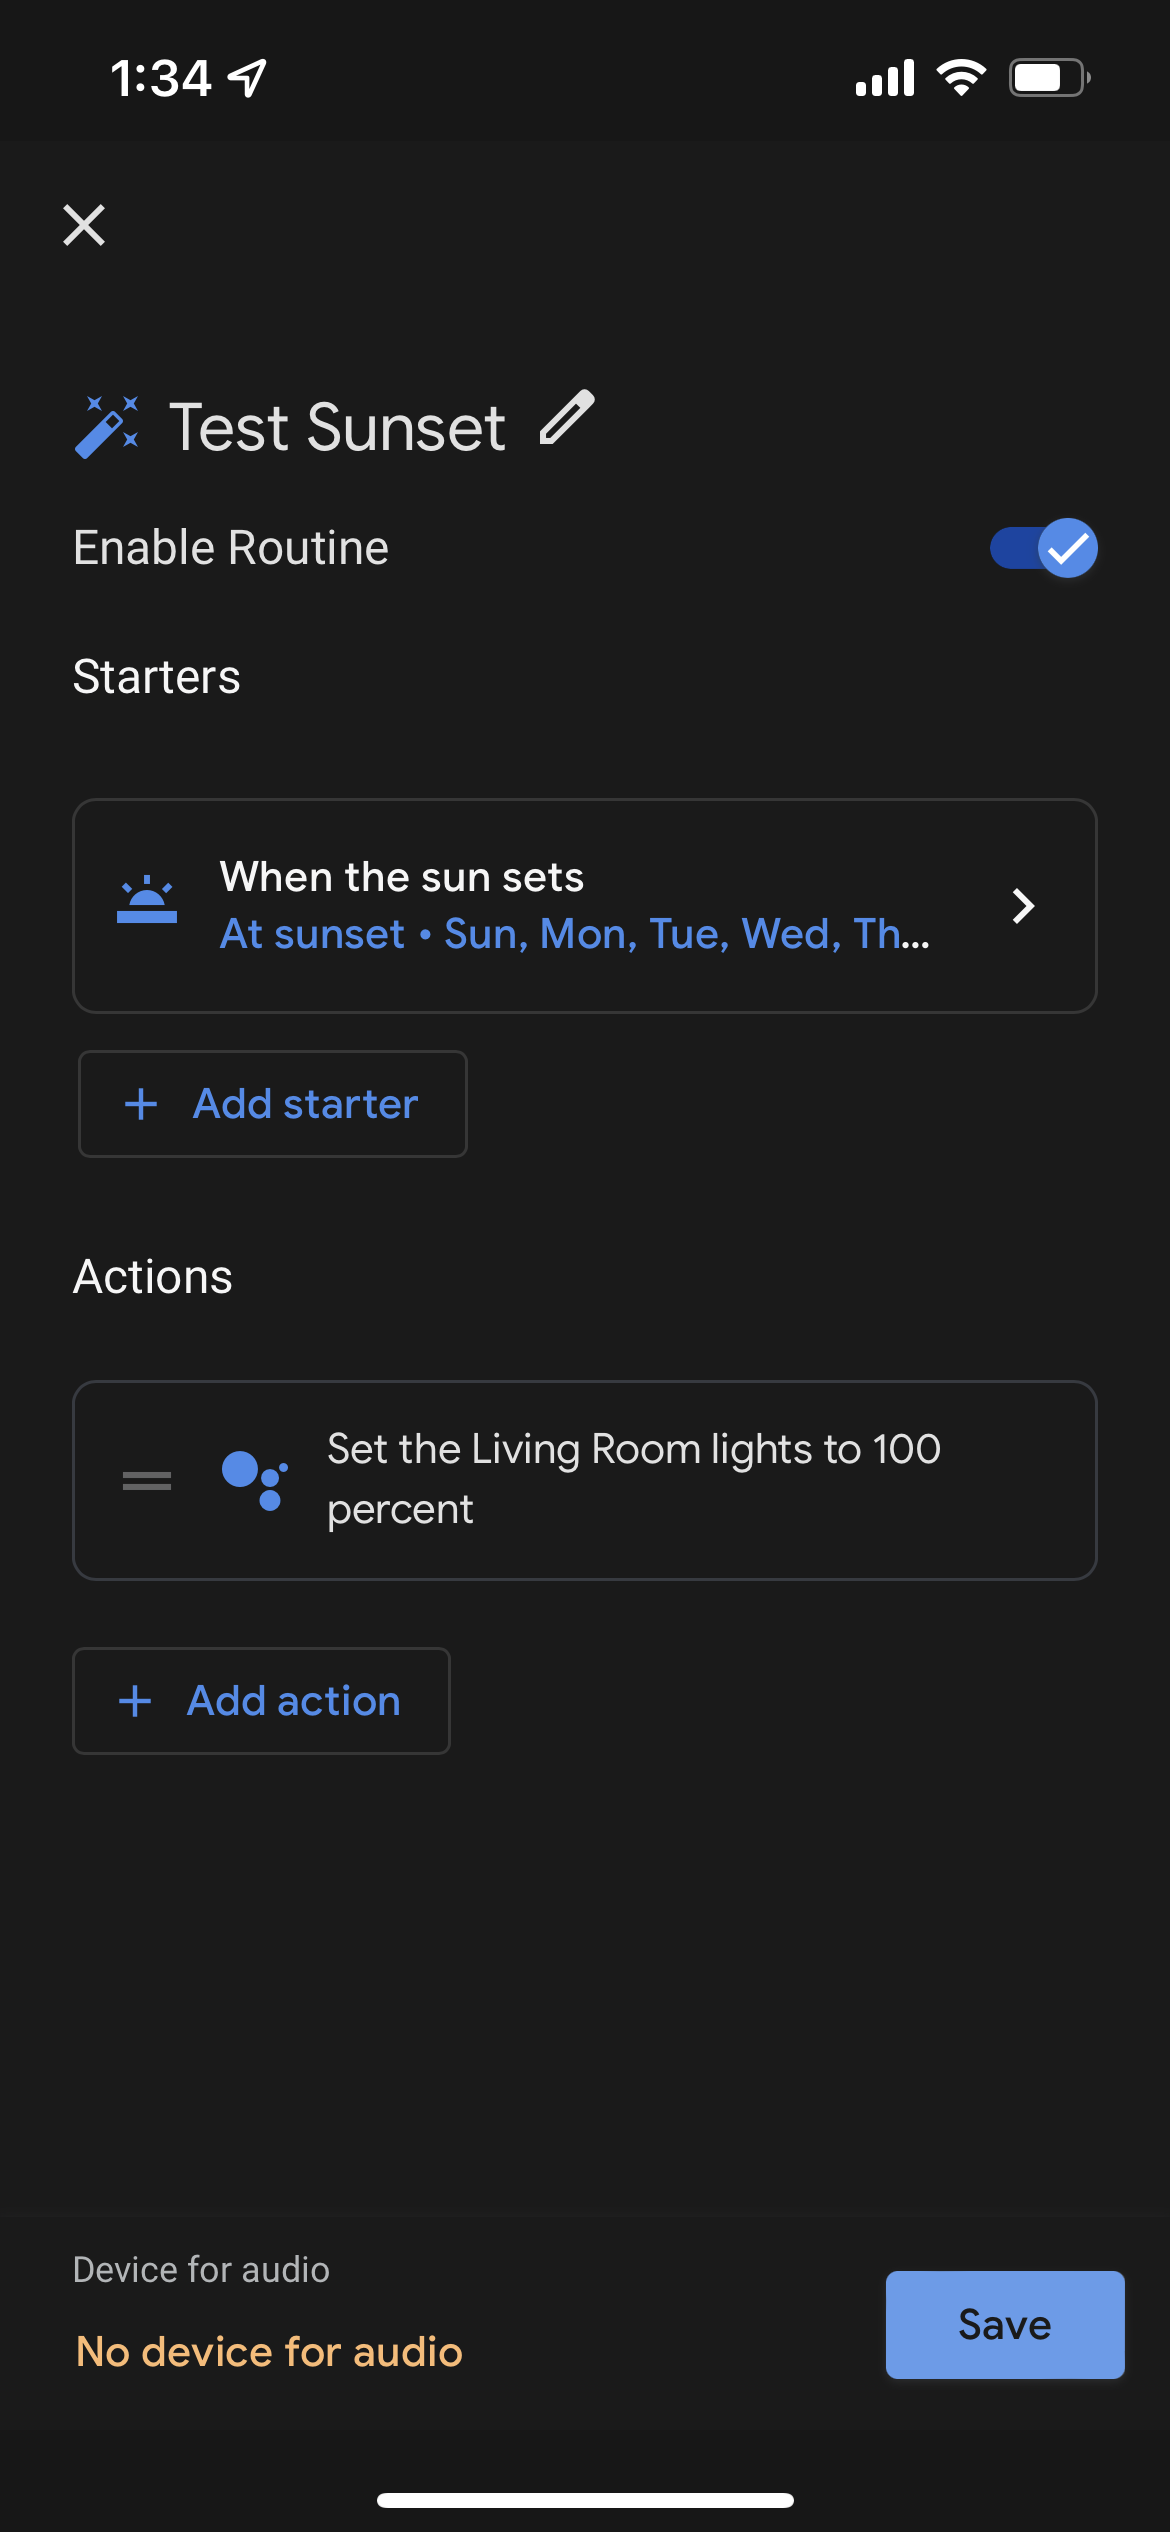 A routine in the Google Home app